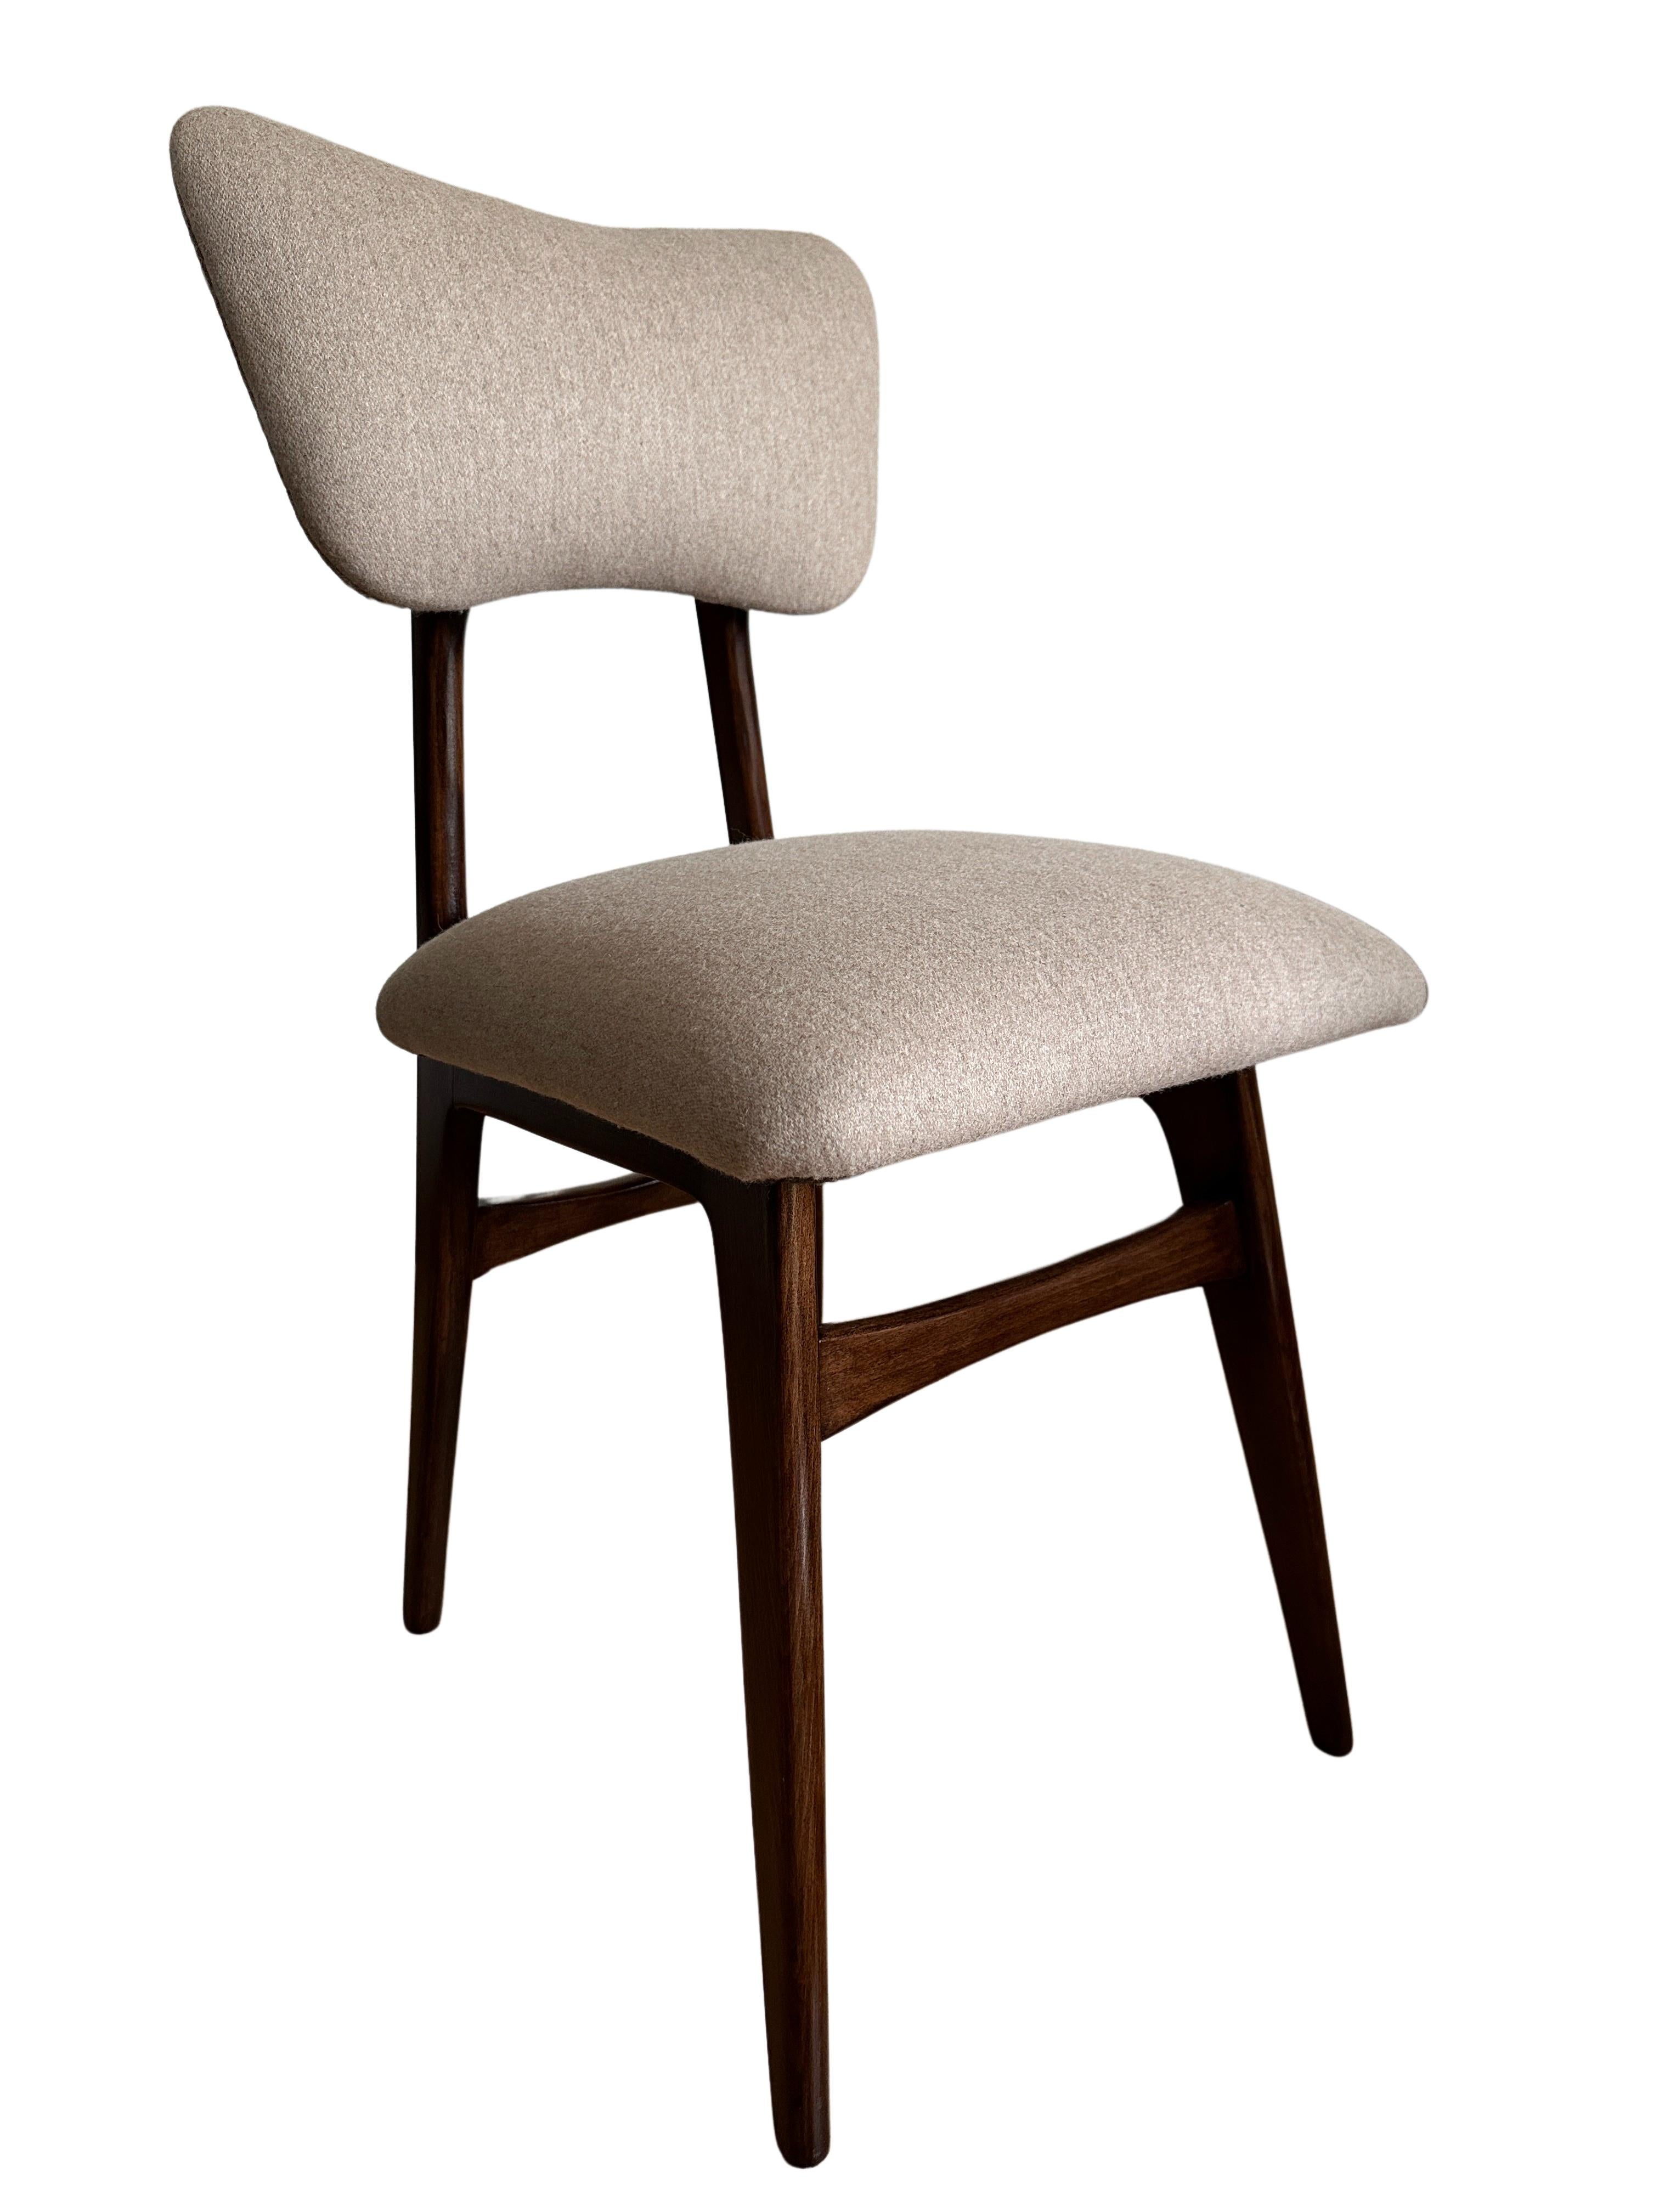 Polish Set of 4 Midcentury Dining Chairs in Beige Wool Upholstery, Poland, 1960s For Sale